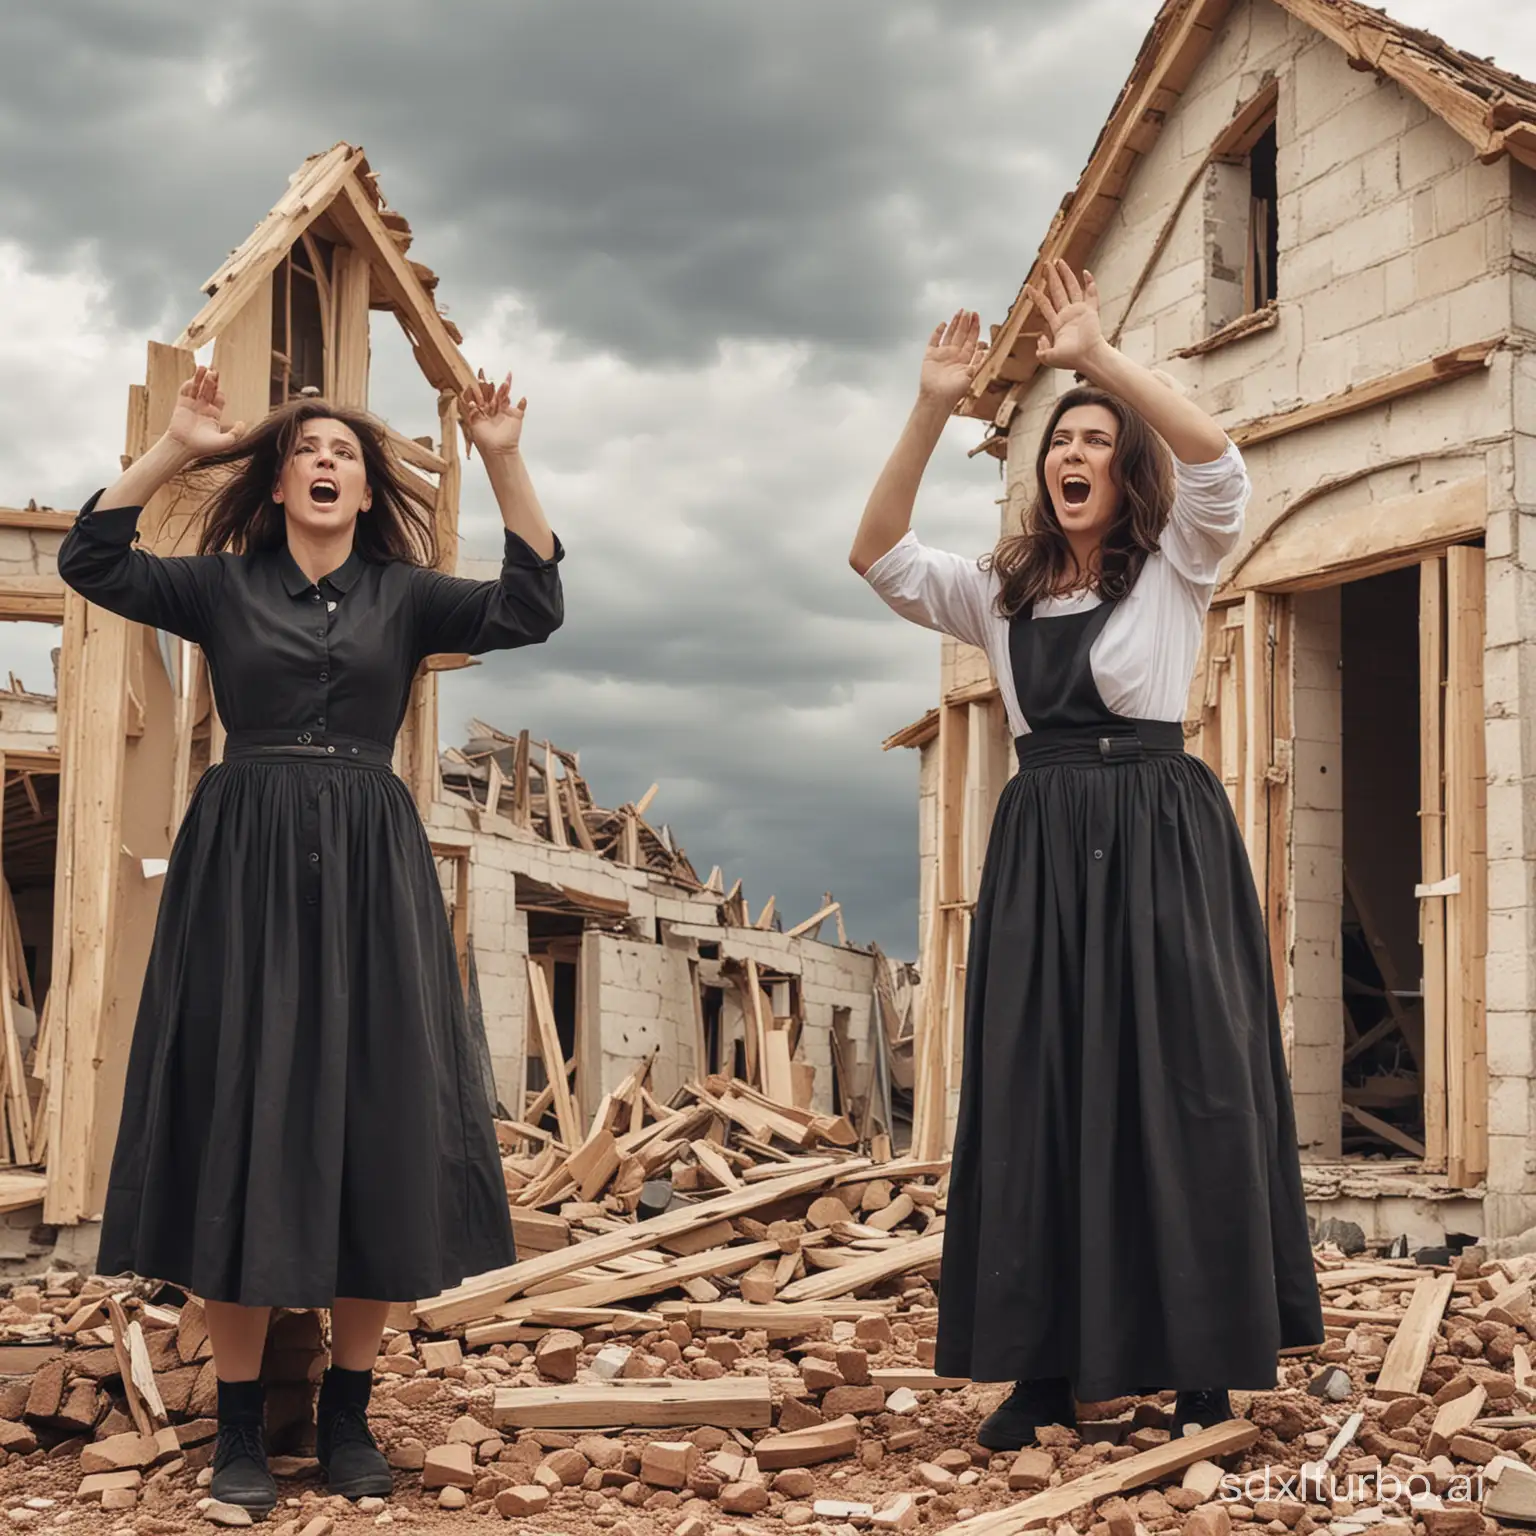 Wise-Woman-Building-and-Foolish-Woman-Destroying-Houses